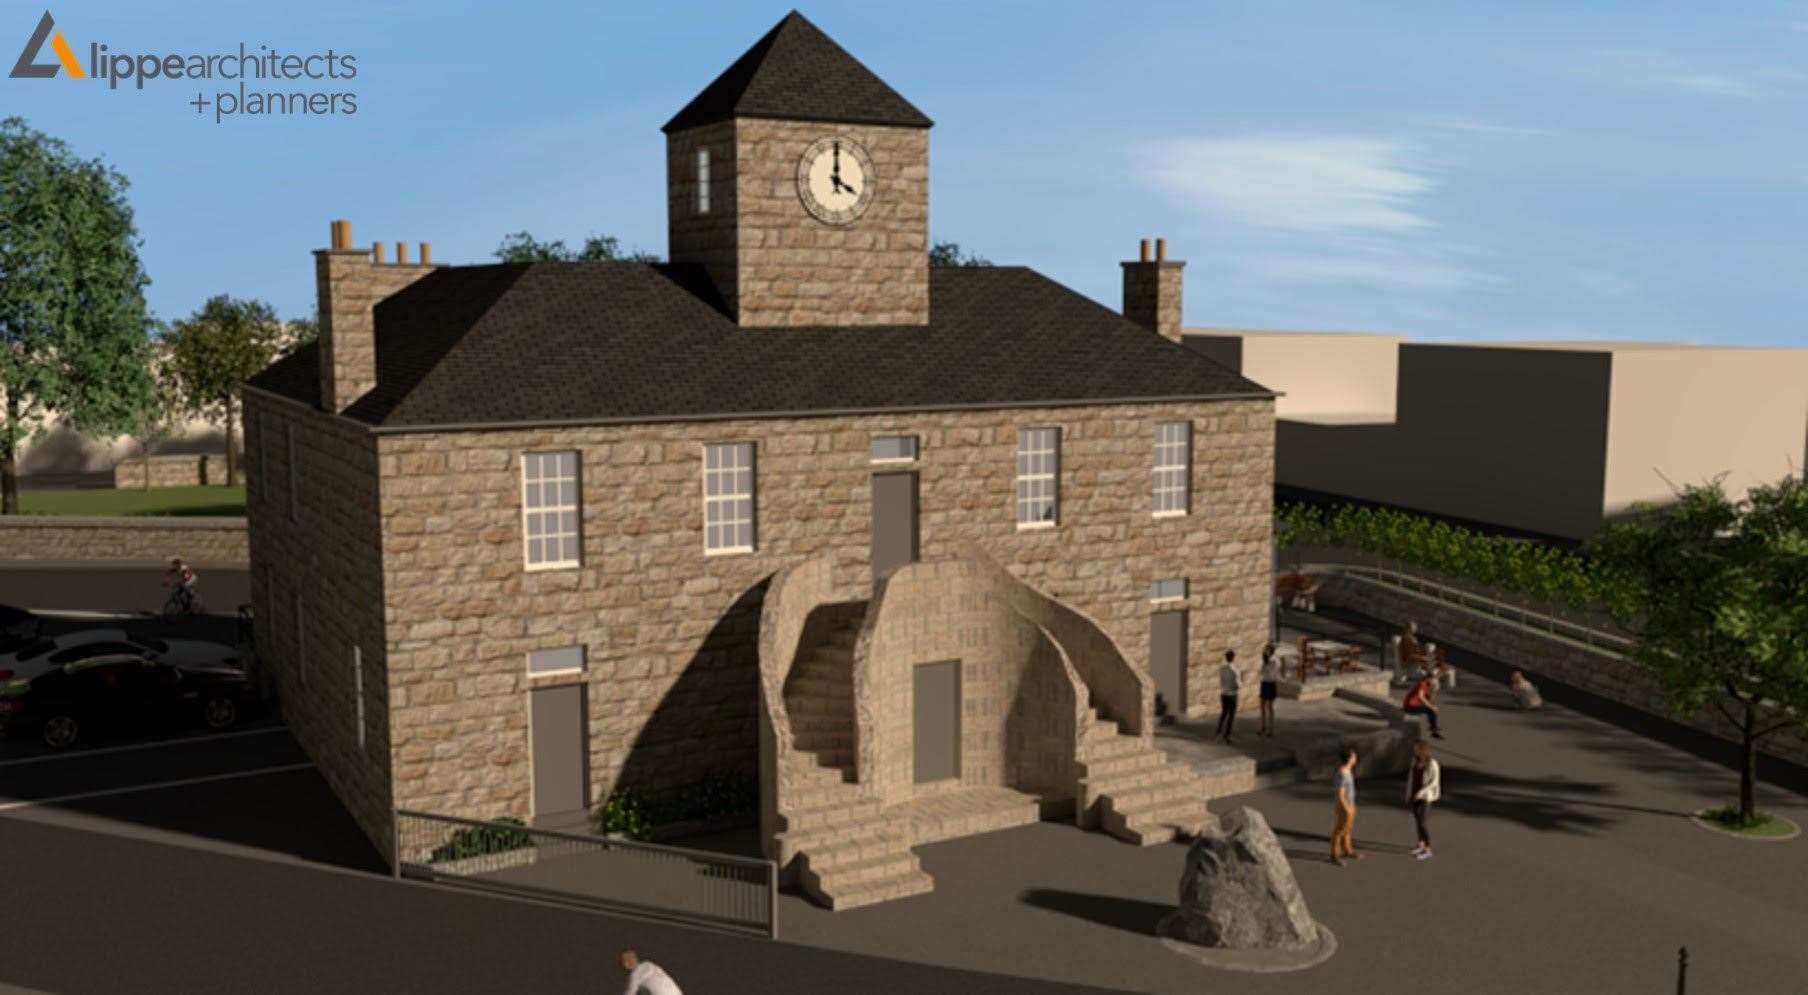 Plans for the revamp of Kintore Town House have been approved